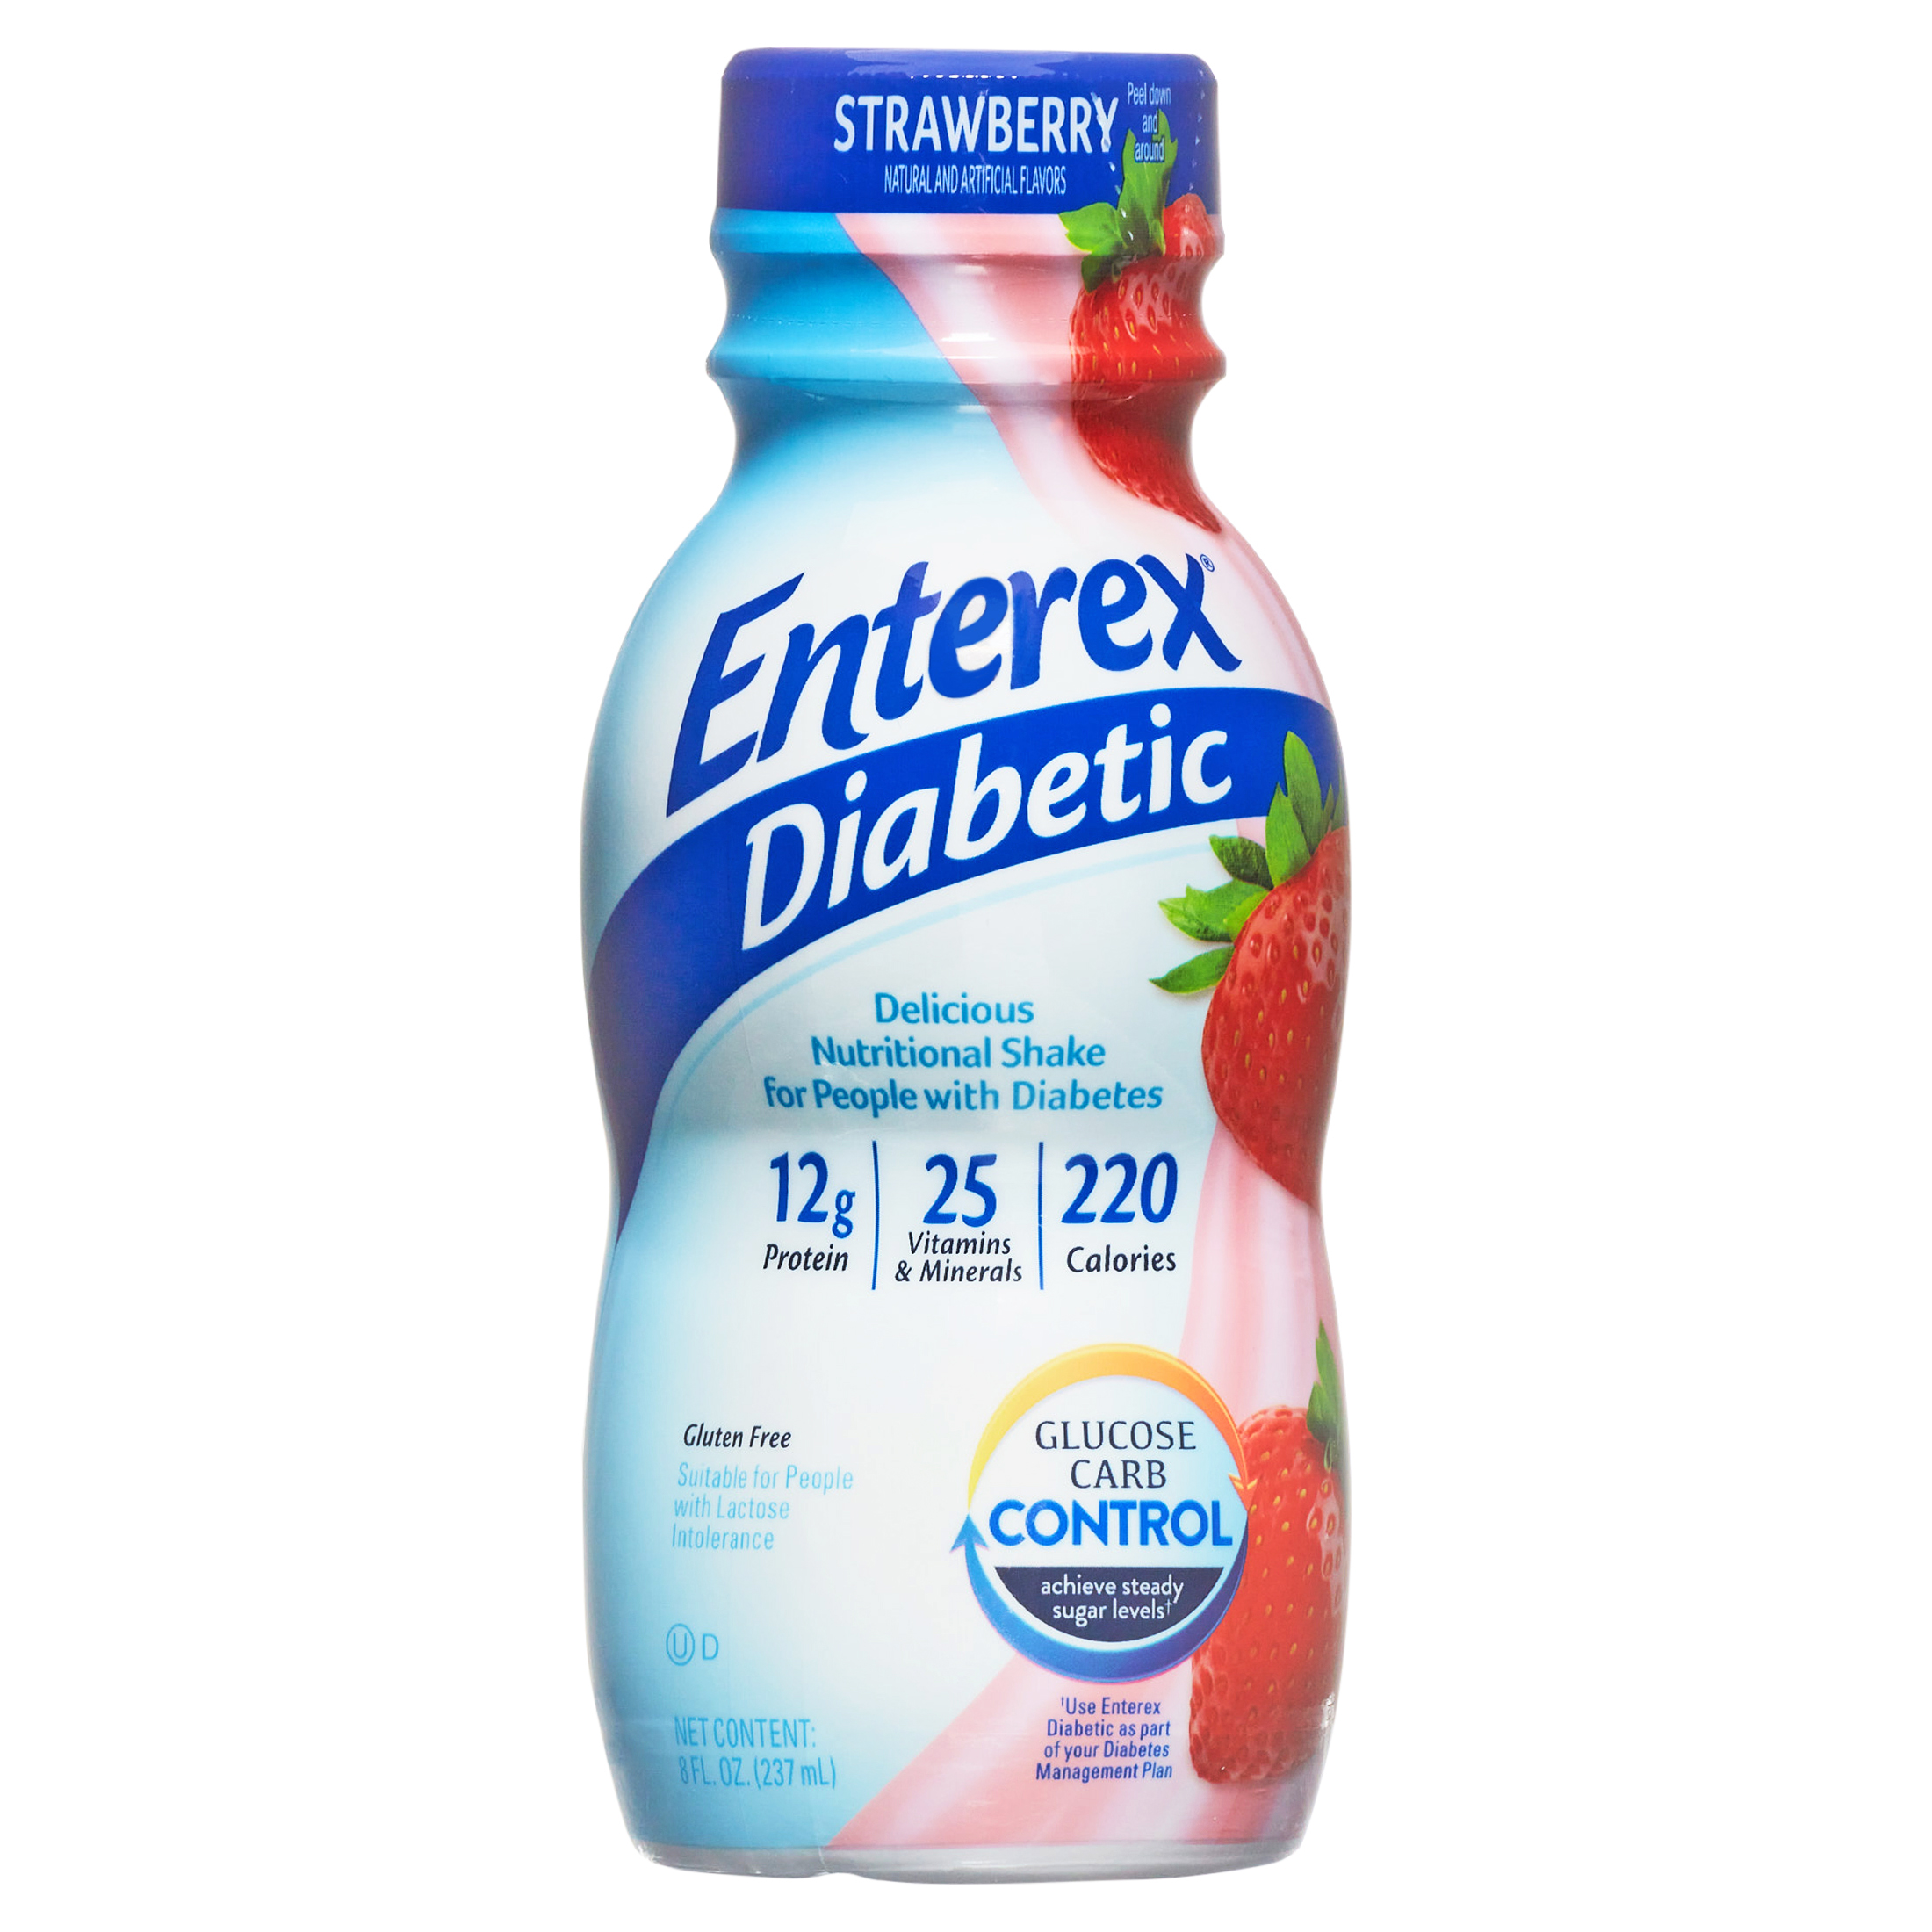 Enterex Diabetic Nutritional Meal Replacement Shake,For People with Diabetes,Strawberry , 8 fl oz, 6 Pack - image 2 of 9